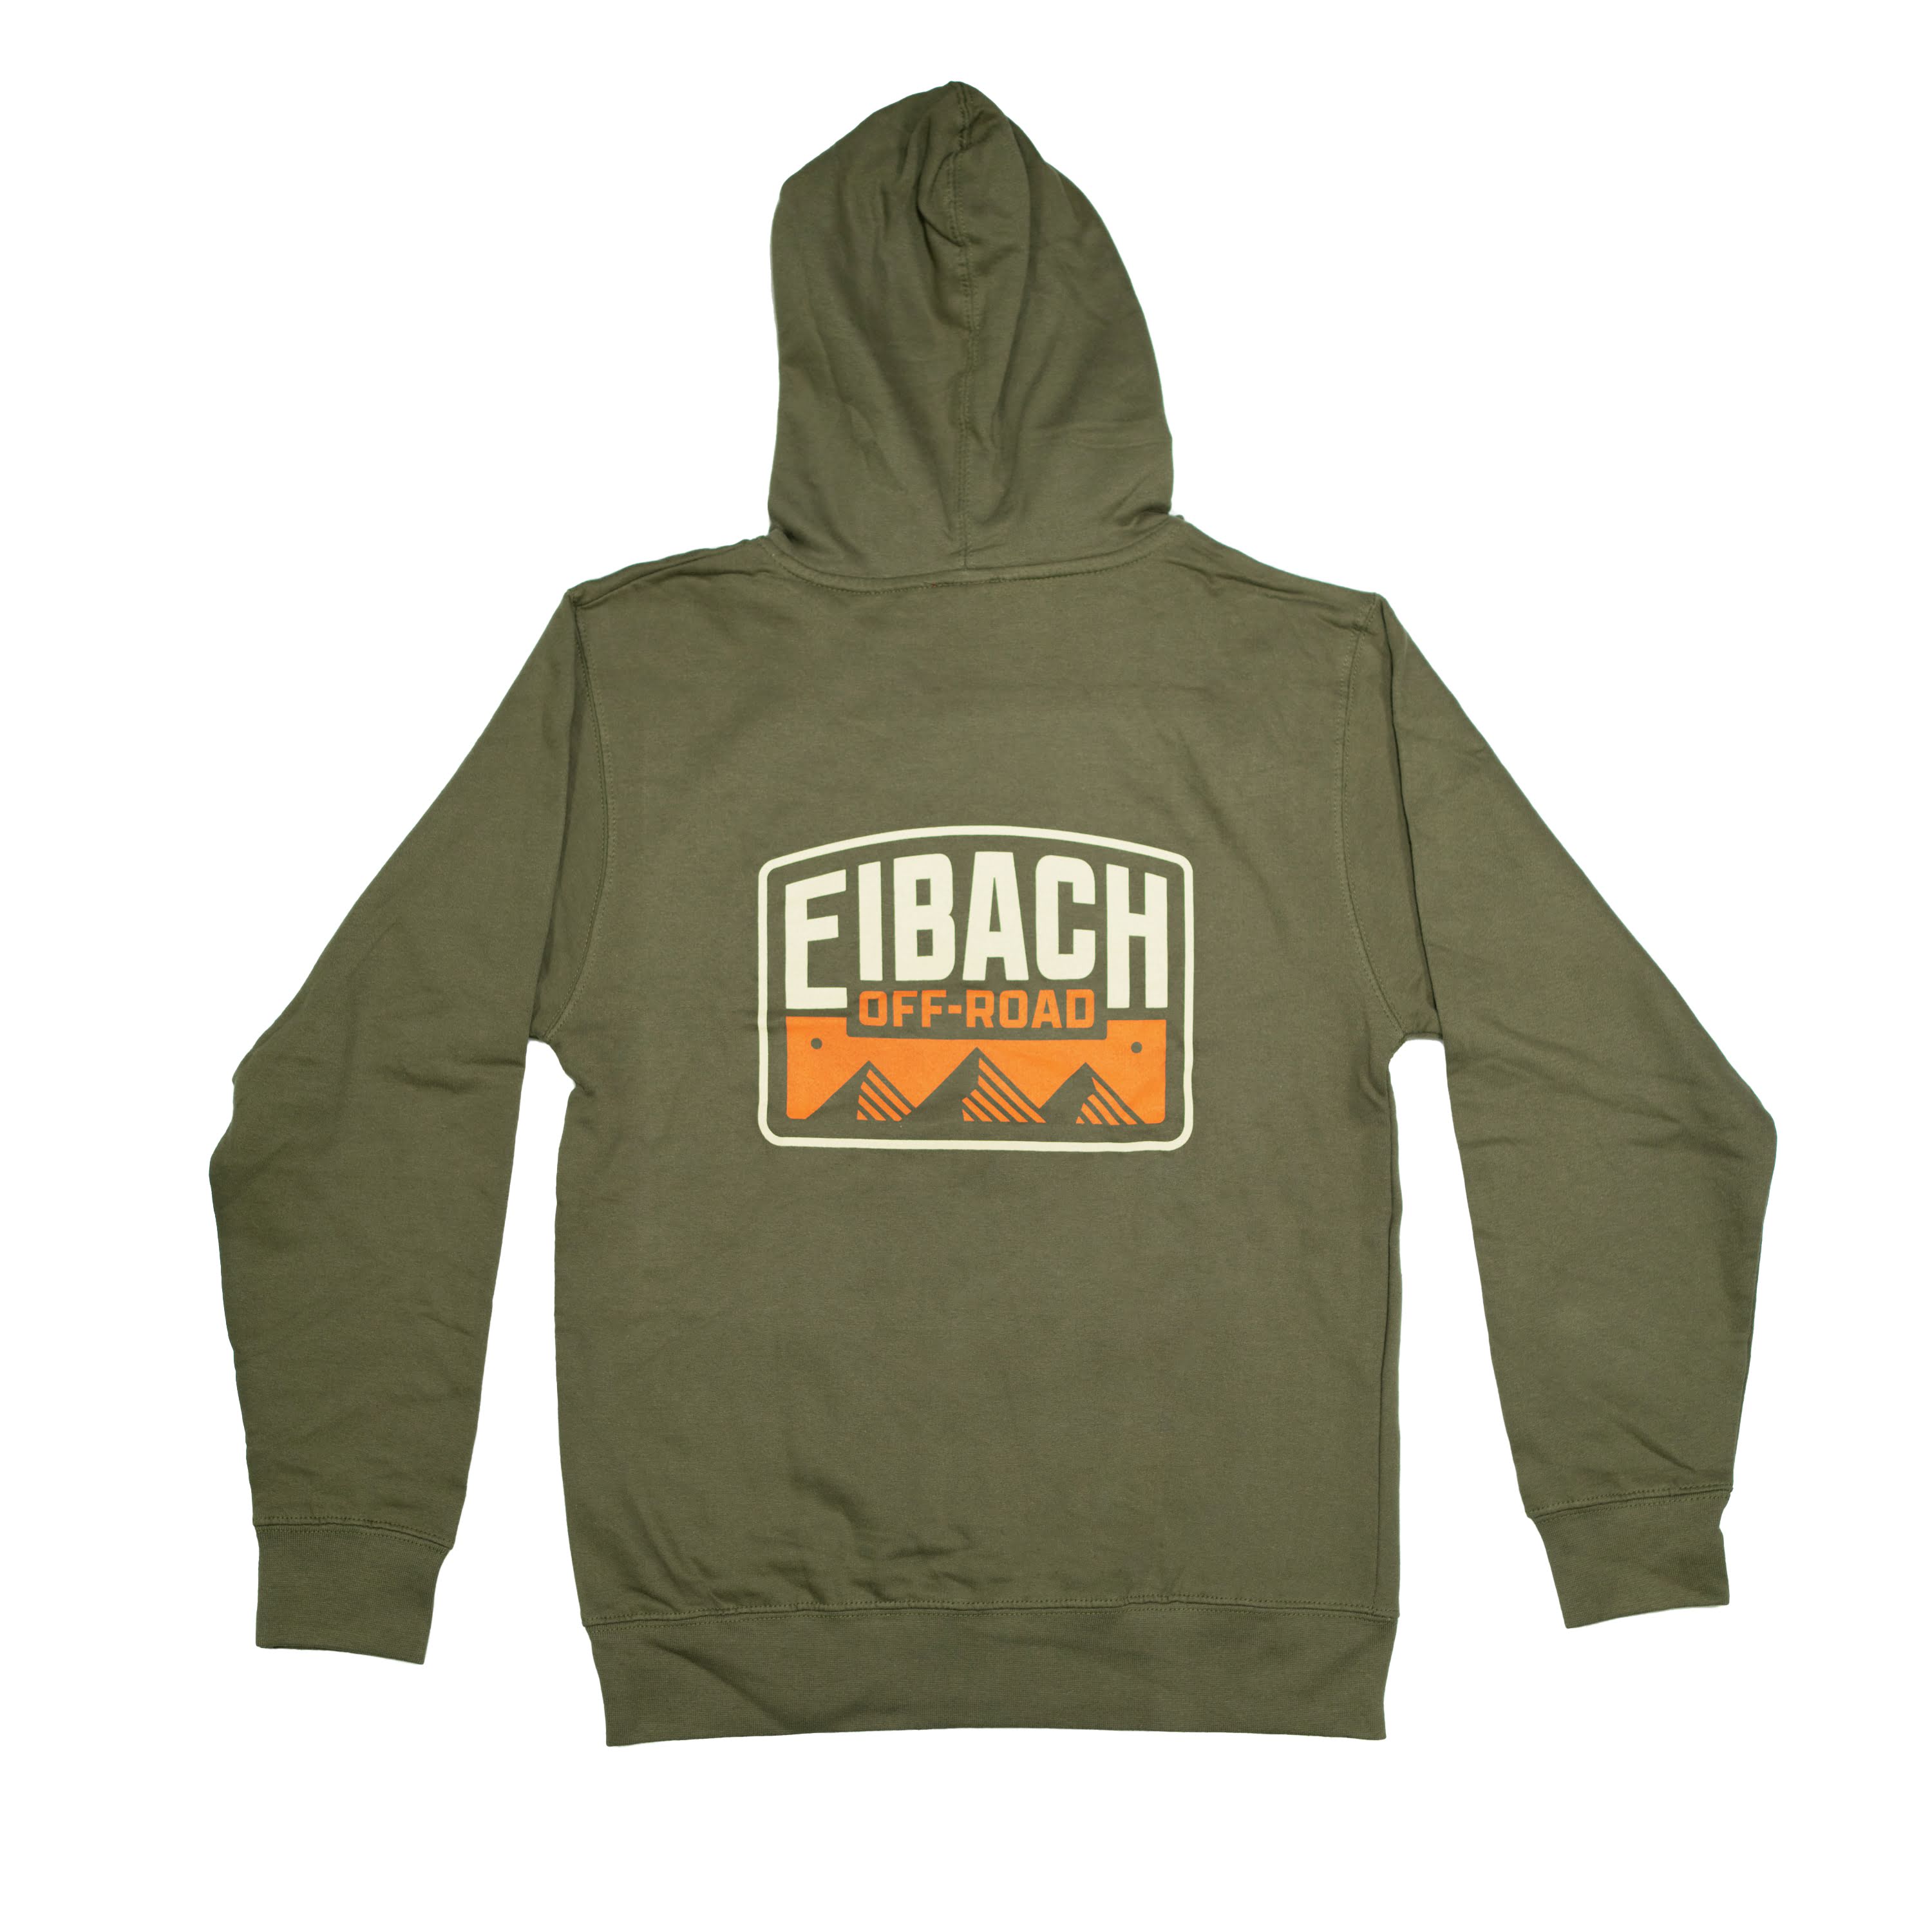 Eibach Offroad Military Green Hoodie Front